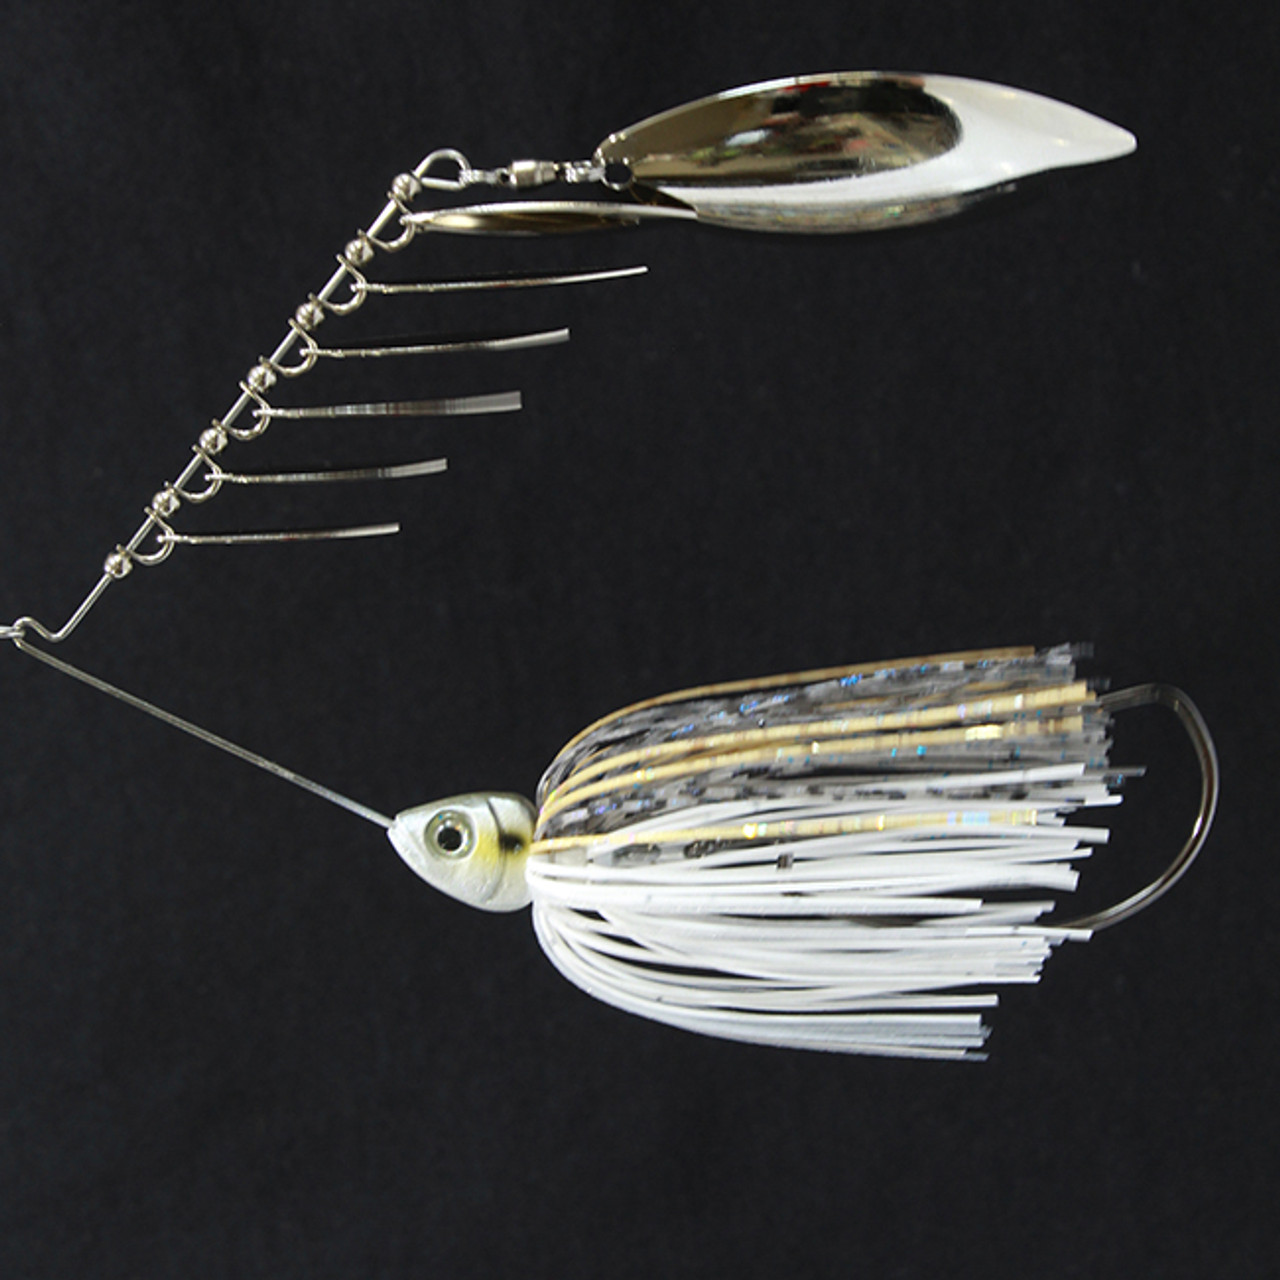 Bassdozer's Ghost Minnow, Tilapia, Machete Shad and More Marvelous  Spinnerbaits!